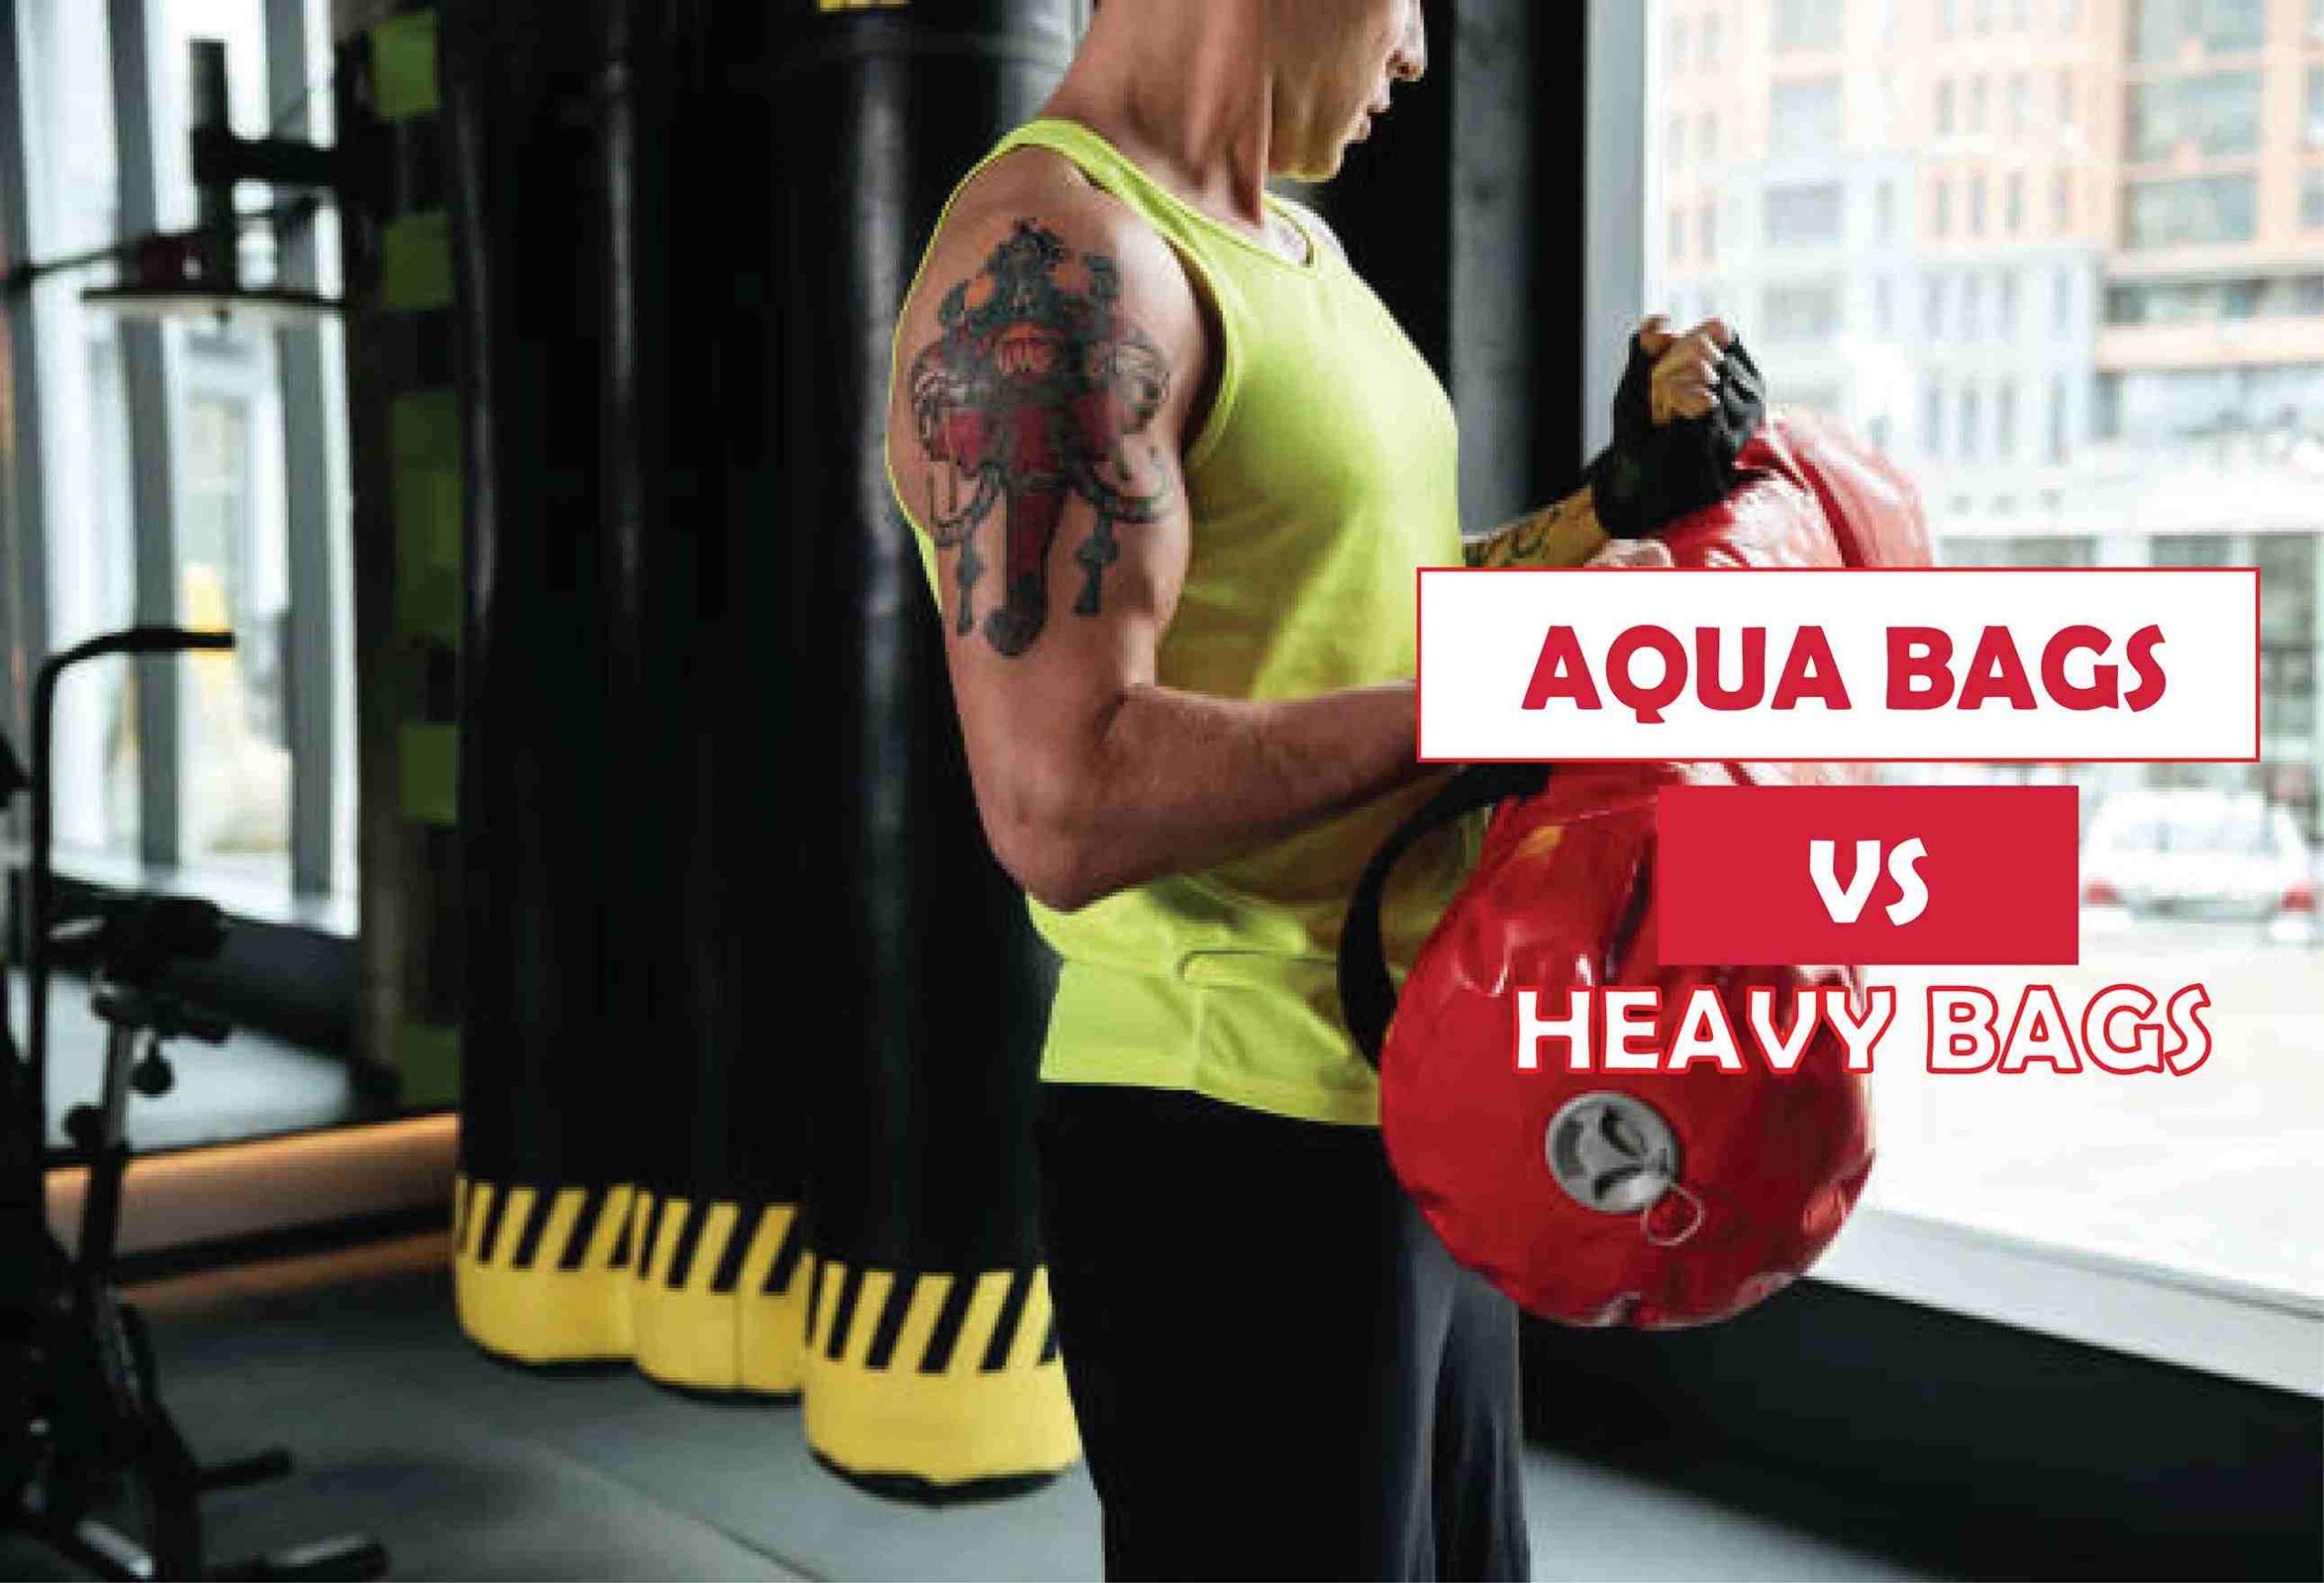 Aqua Bag Vs Heavy Bag-Which One Suits You Better?